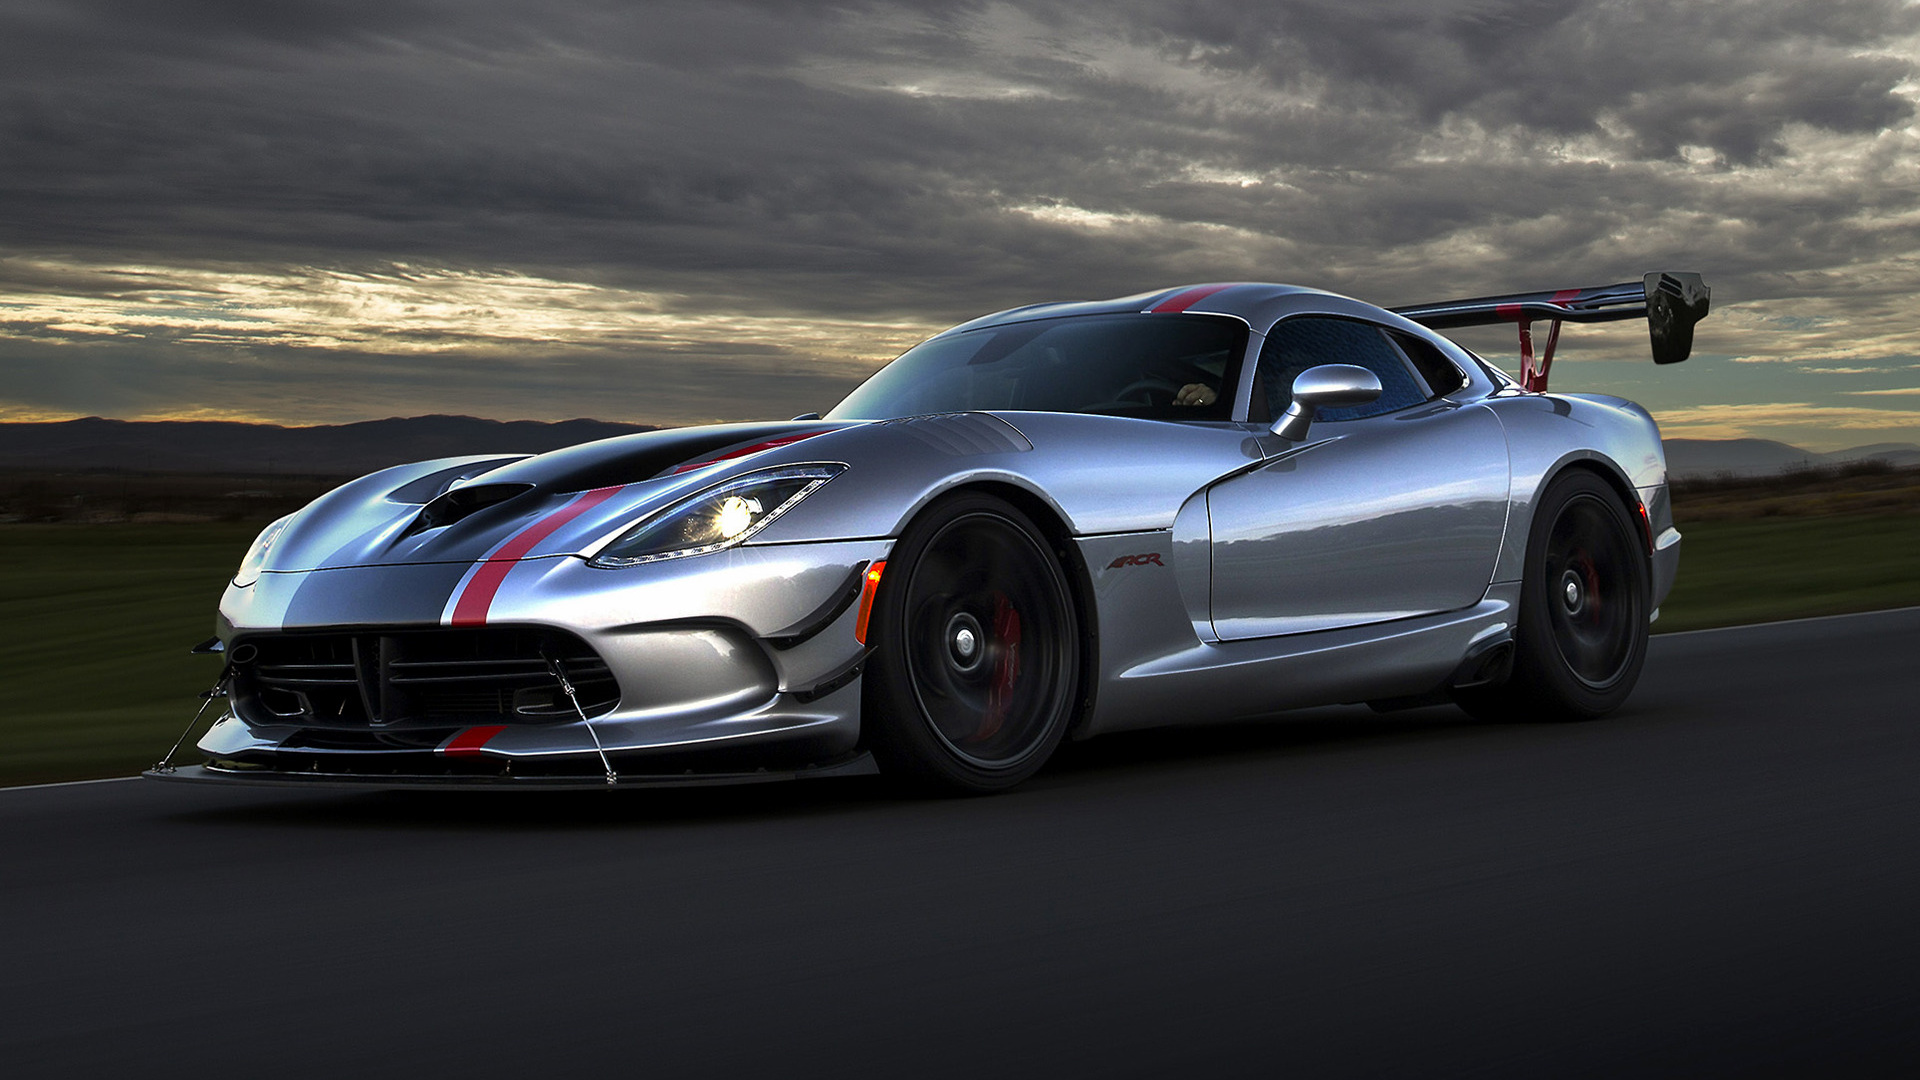 2016 Dodge Viper ACR - Wallpapers and HD Images | Car Pixel